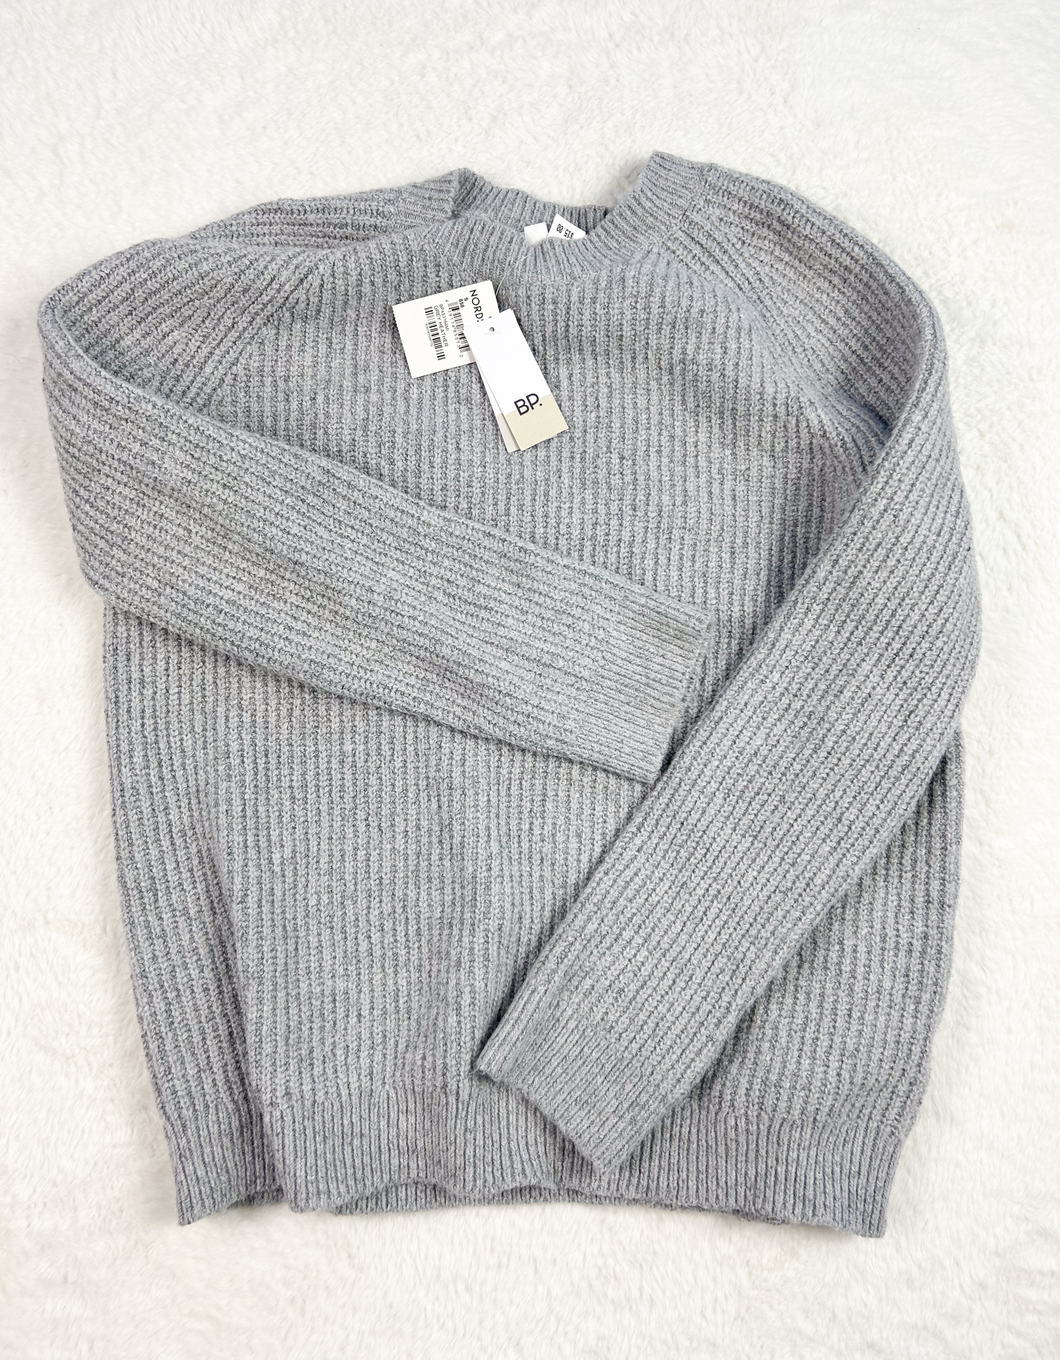 Bp Sweater Size Small *